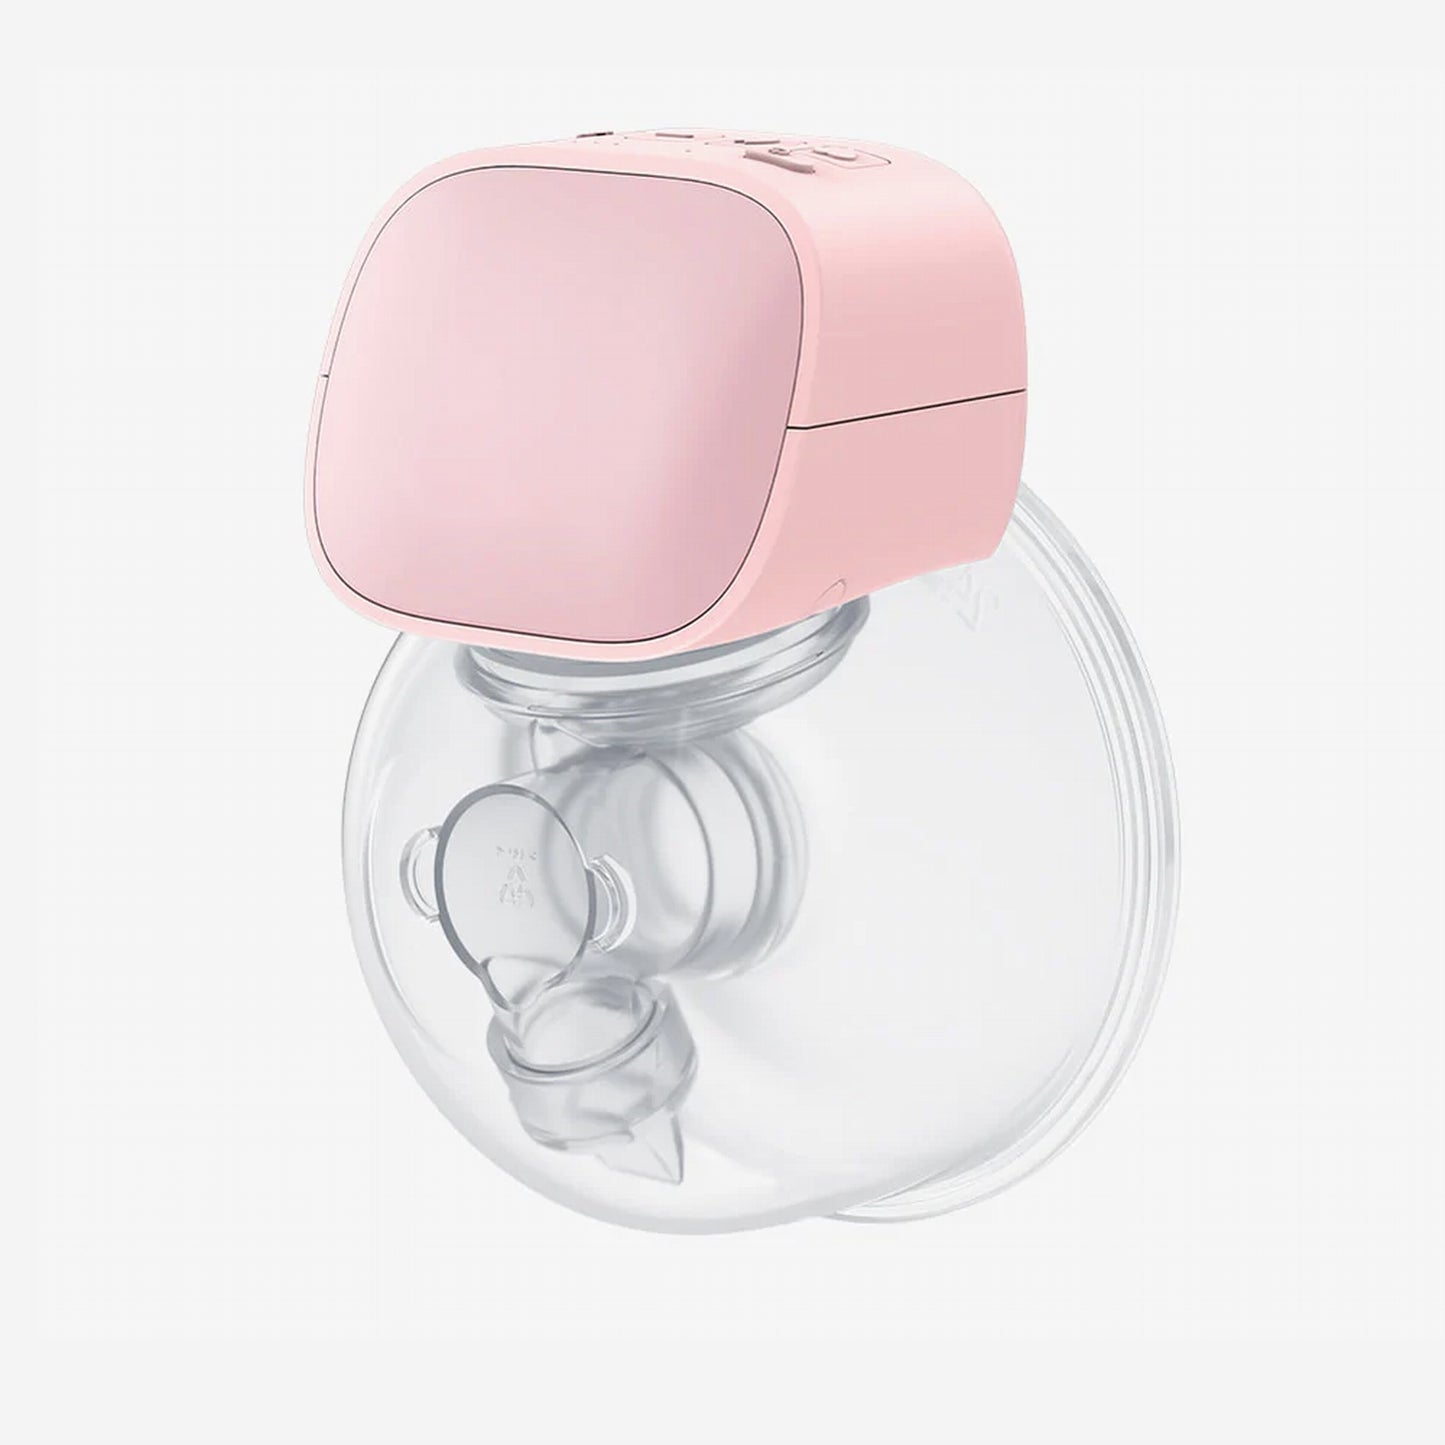 Mamomy S9 Double Wearable Breast Pump, Hands-Free Breast Pump, Portable Electric Breast Pump with 2 Mode & 5 Levels